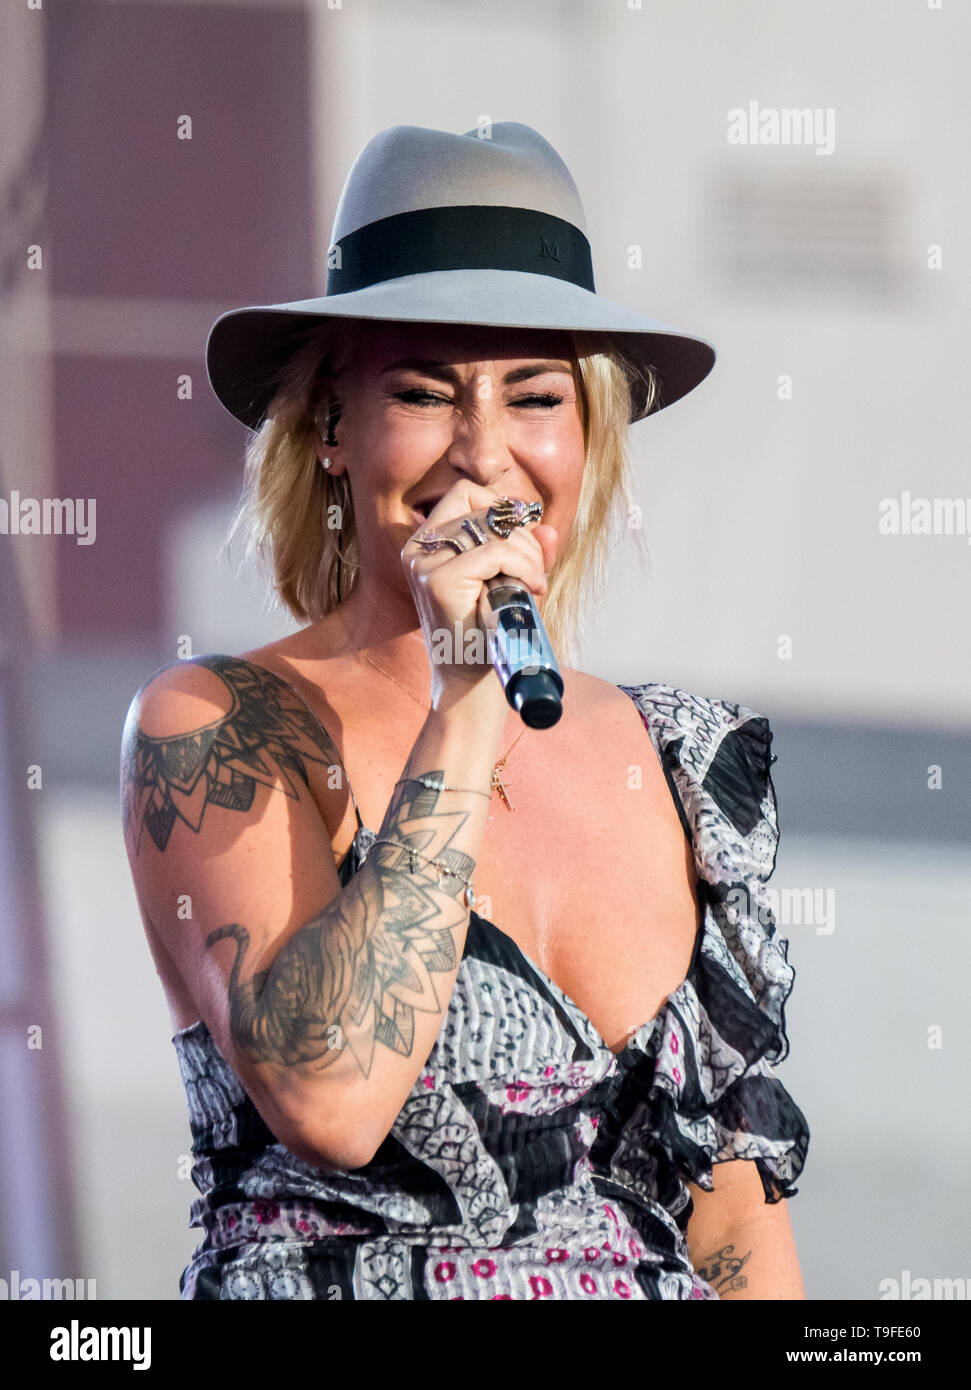 Sarah Connor Singer High Resolution Stock Photography and Images - Alamy